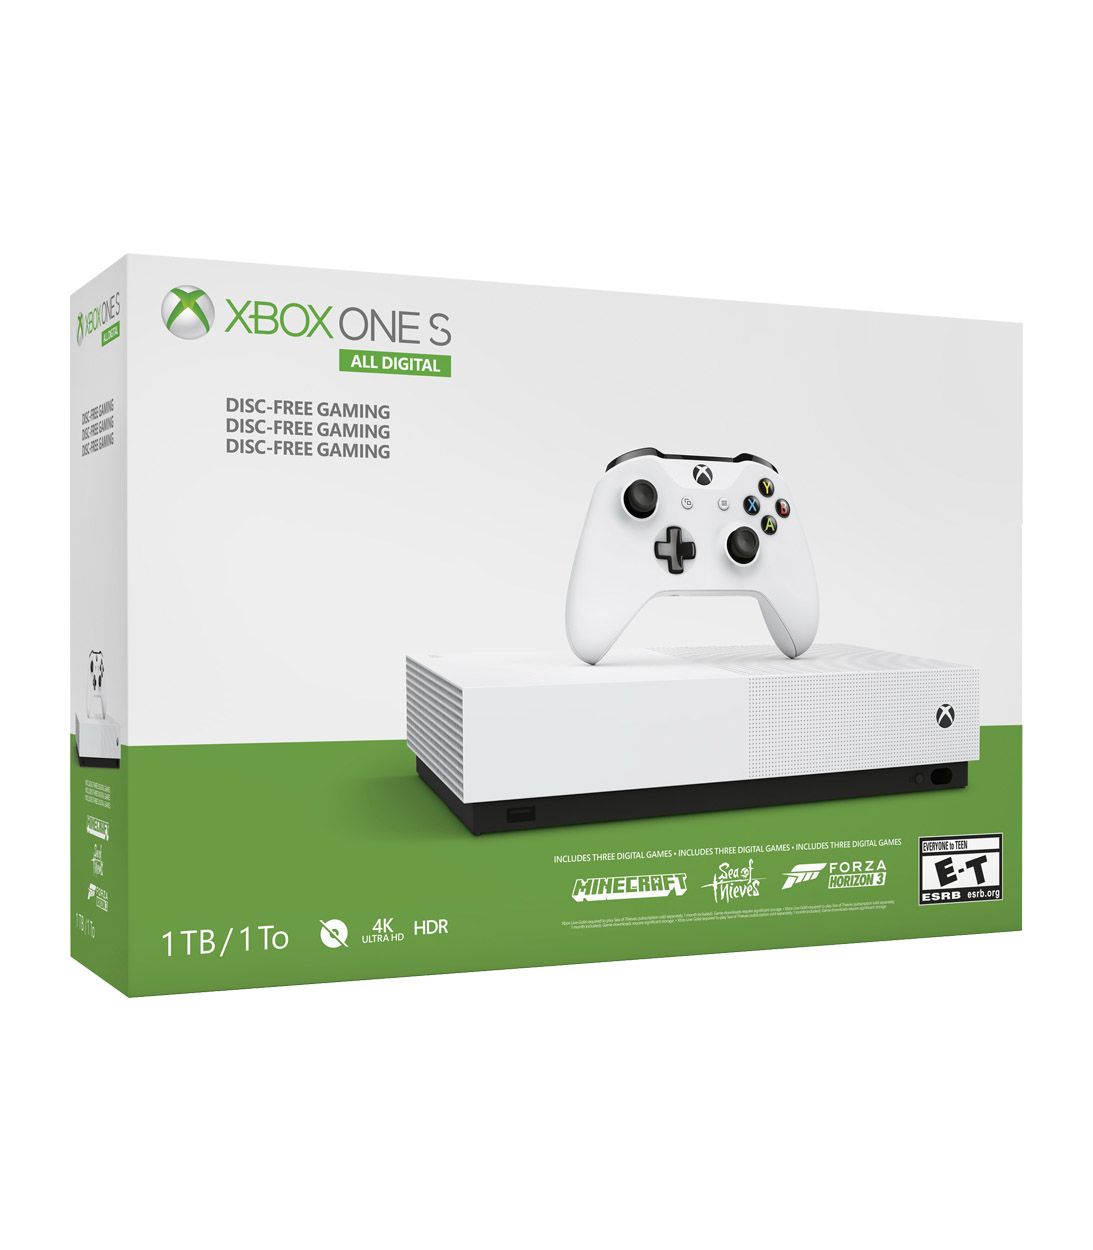 Xbox One S All-Digital Edition Box FRONT VERTICAL